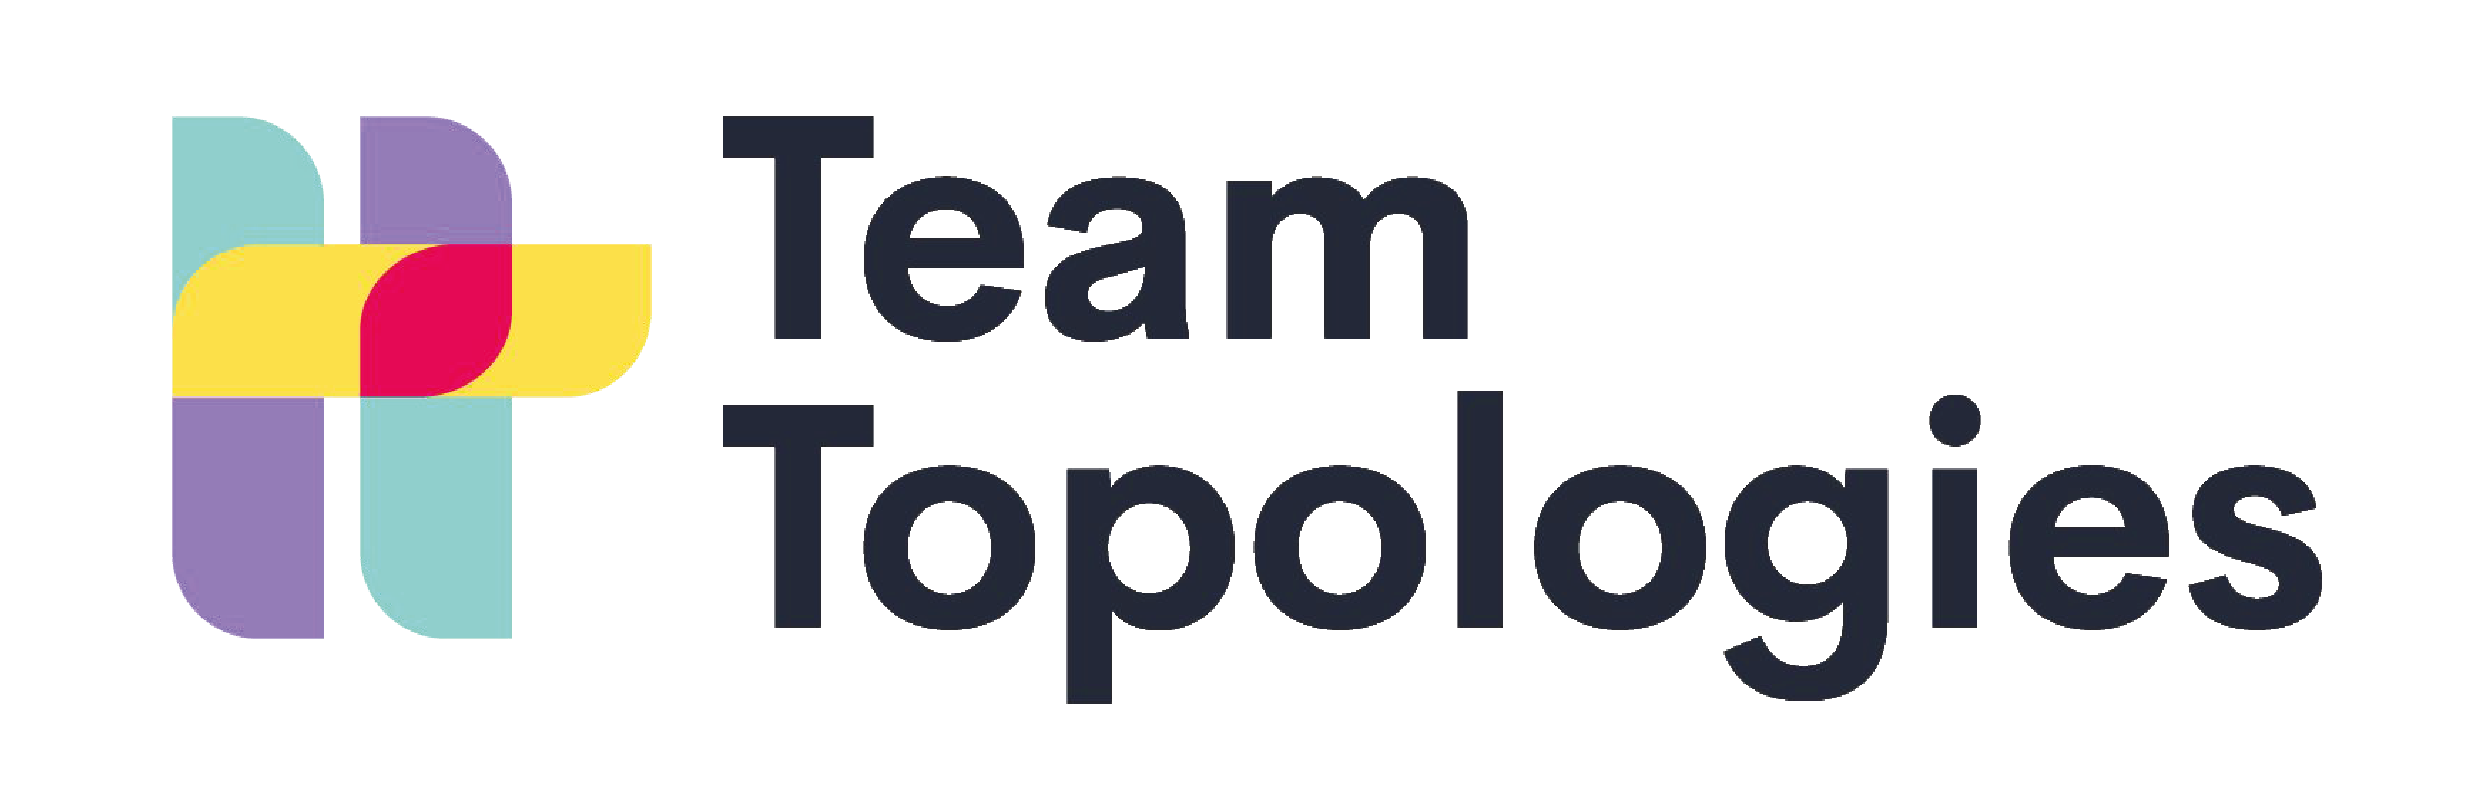 Notes on “Team Topologies” by Matthew Skelton and Manuel Pais